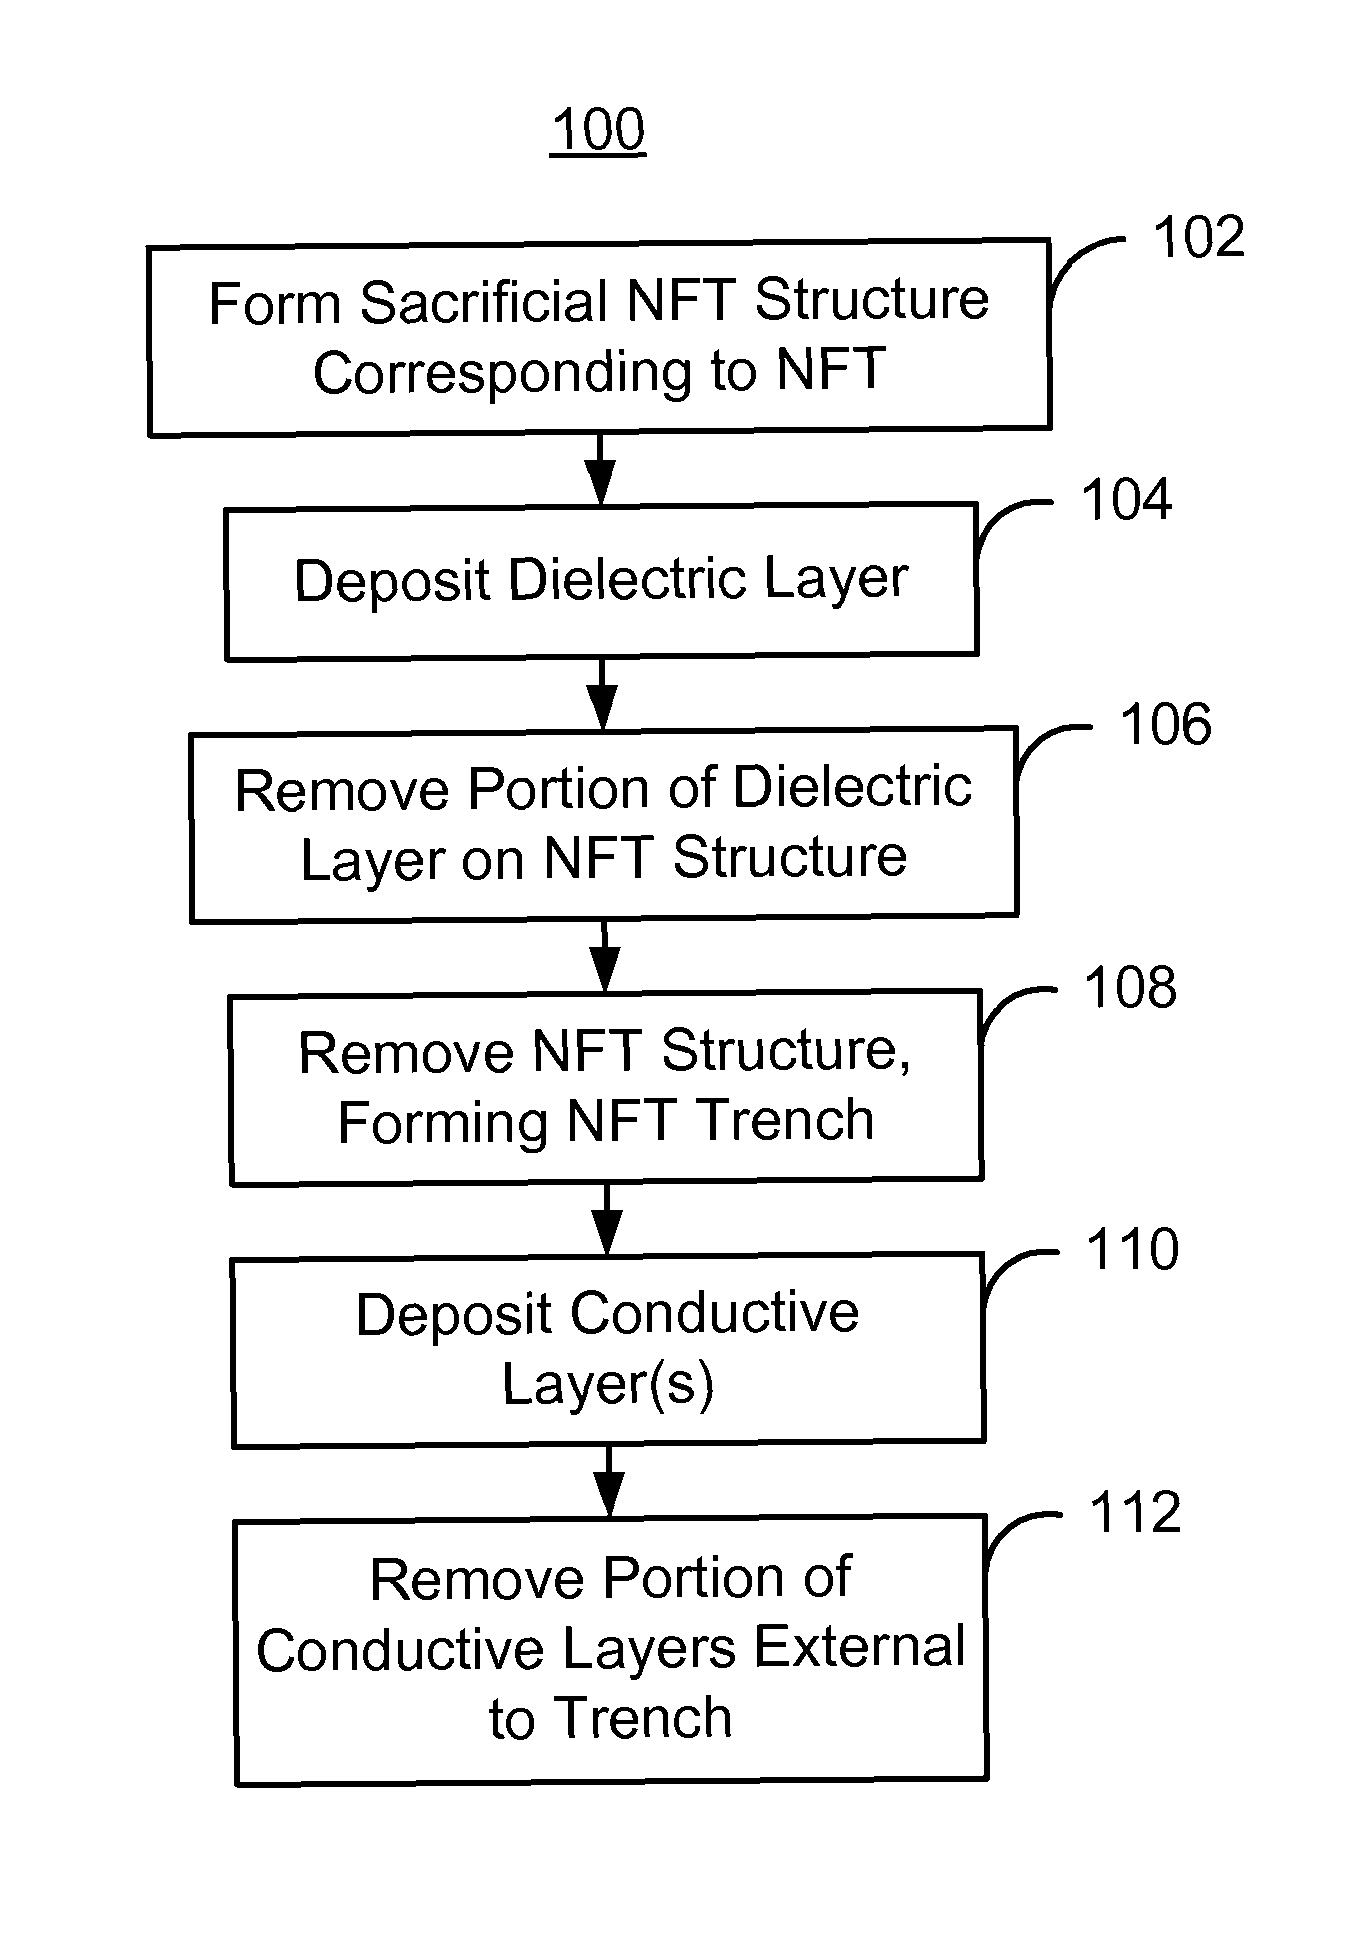 Method and system for providing an NFT using a sacrificial NFT structure